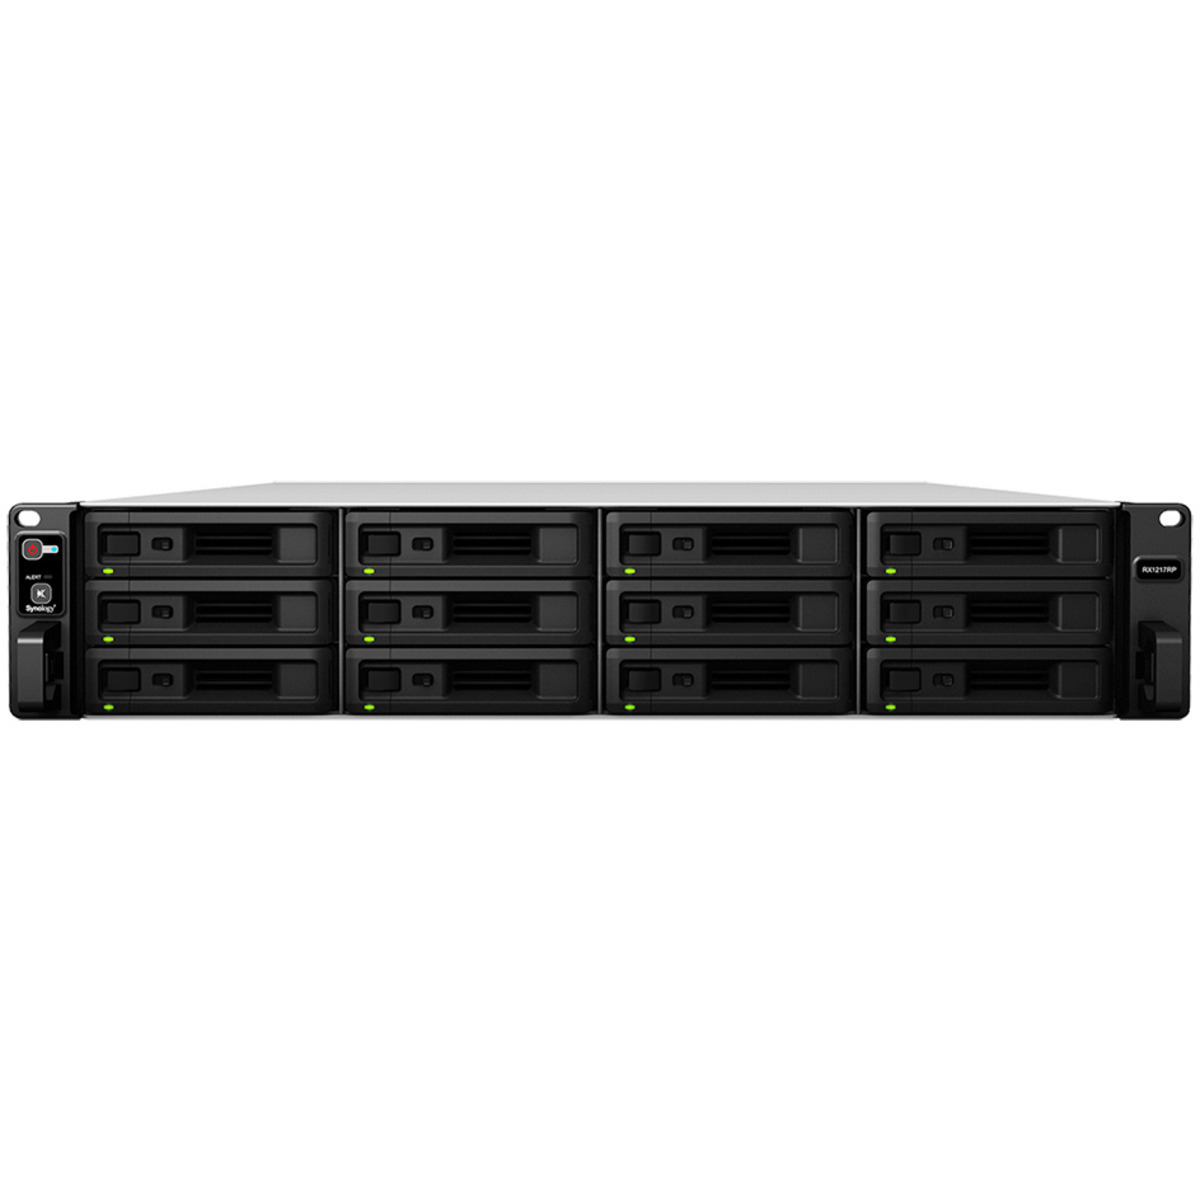 buy $4748 Synology RX1217 96tb RackMount Expansion Enclosure 12x8000gb Seagate EXOS ST8000NM000A 3.5 7200rpm SATA 6Gb/s HDD ENTERPRISE Class Drives Installed - Burn-In Tested - nas headquarters buy network attached storage server device das new raid-5 free shipping usa christmas new year holiday sale RX1217